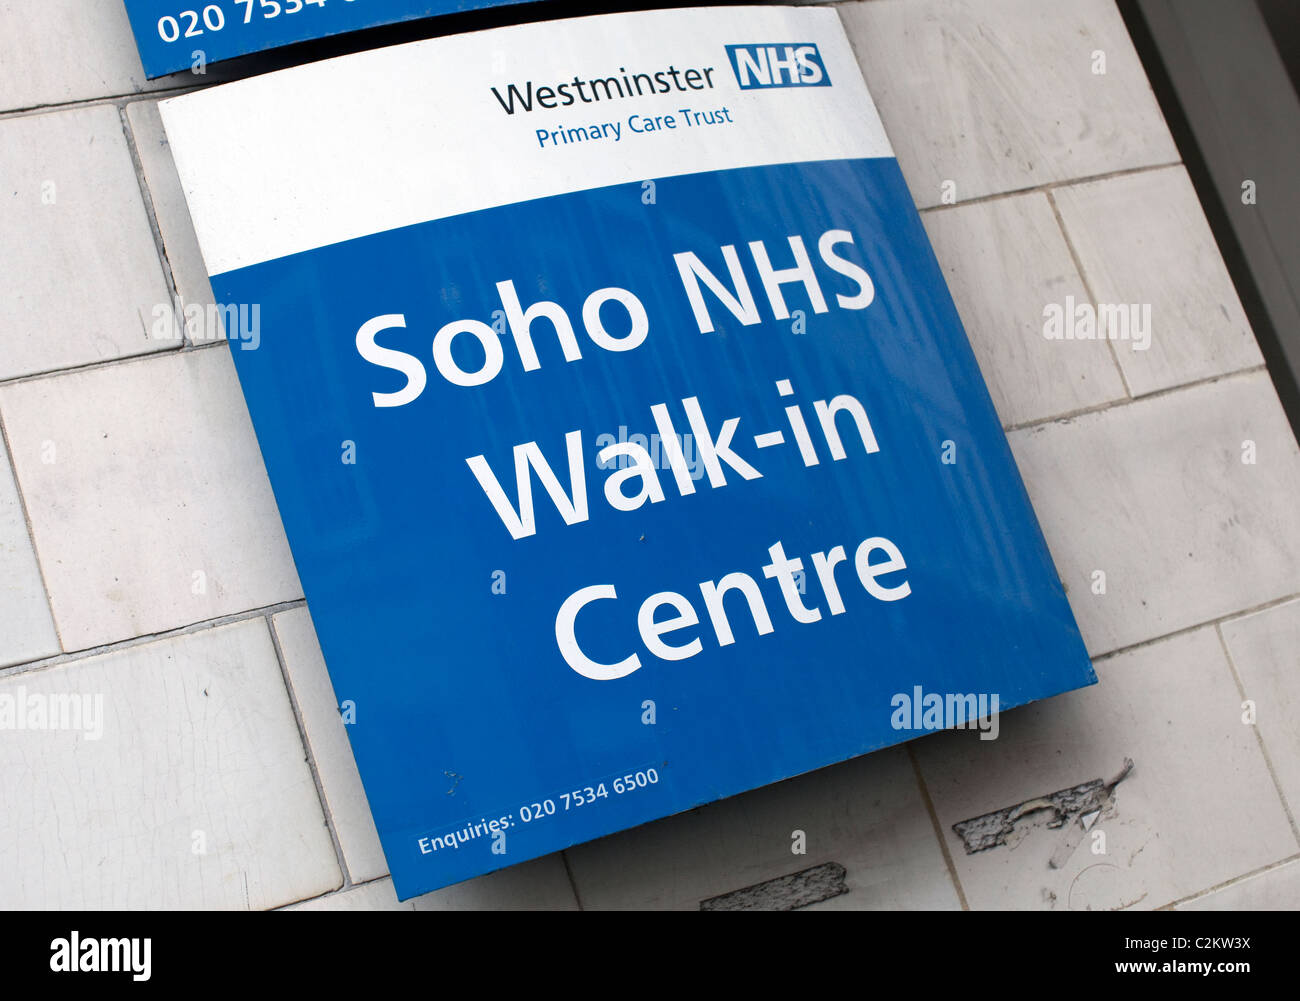 Sign on NHS Walk-in Health Centre, Soho, London Stock Photo